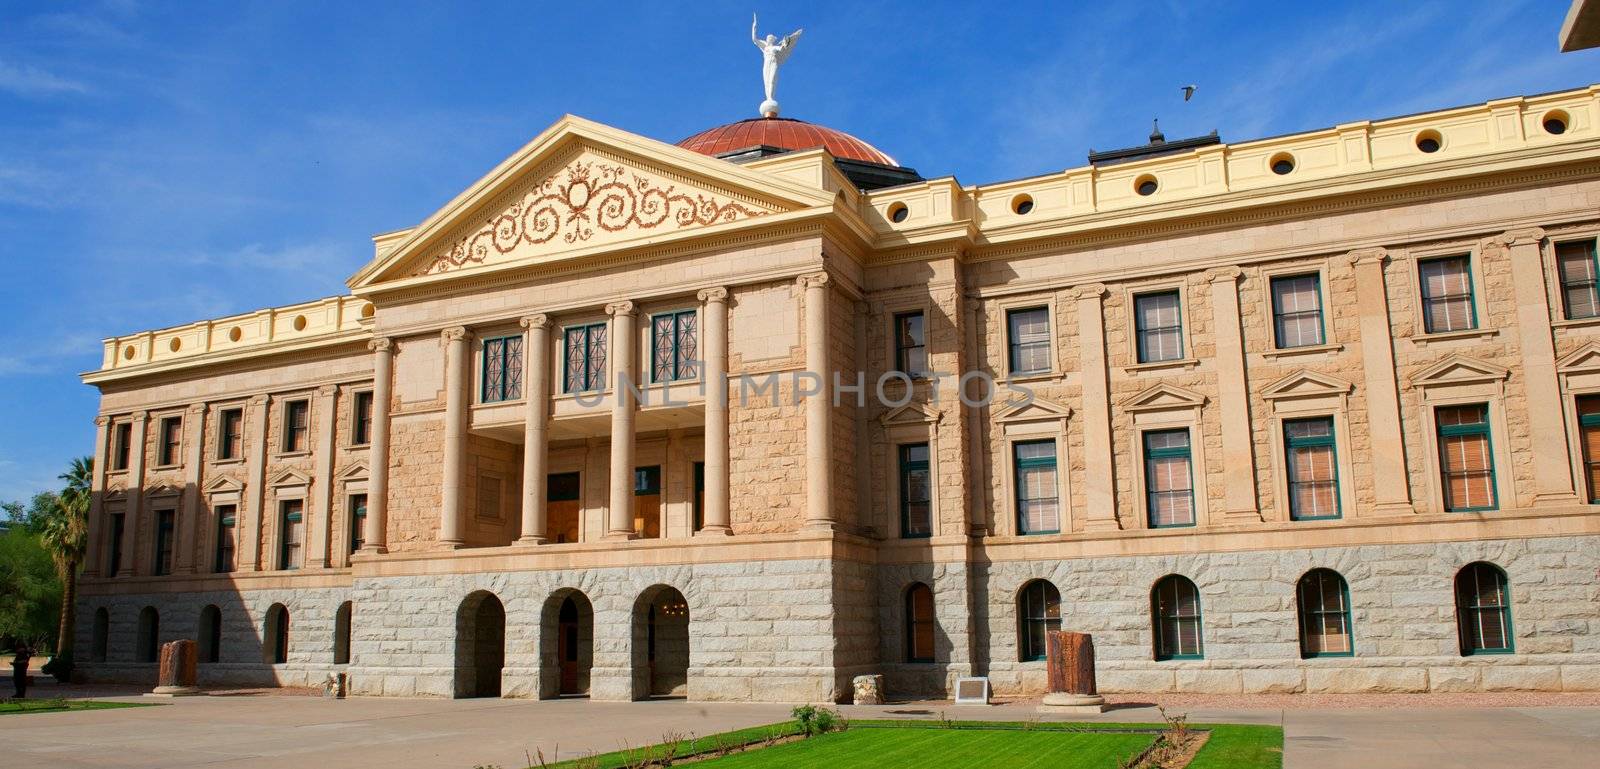 An Arizona State Capital building with circular pillars topped off with a copper dome and white angel with a bright blue sky and green grass.